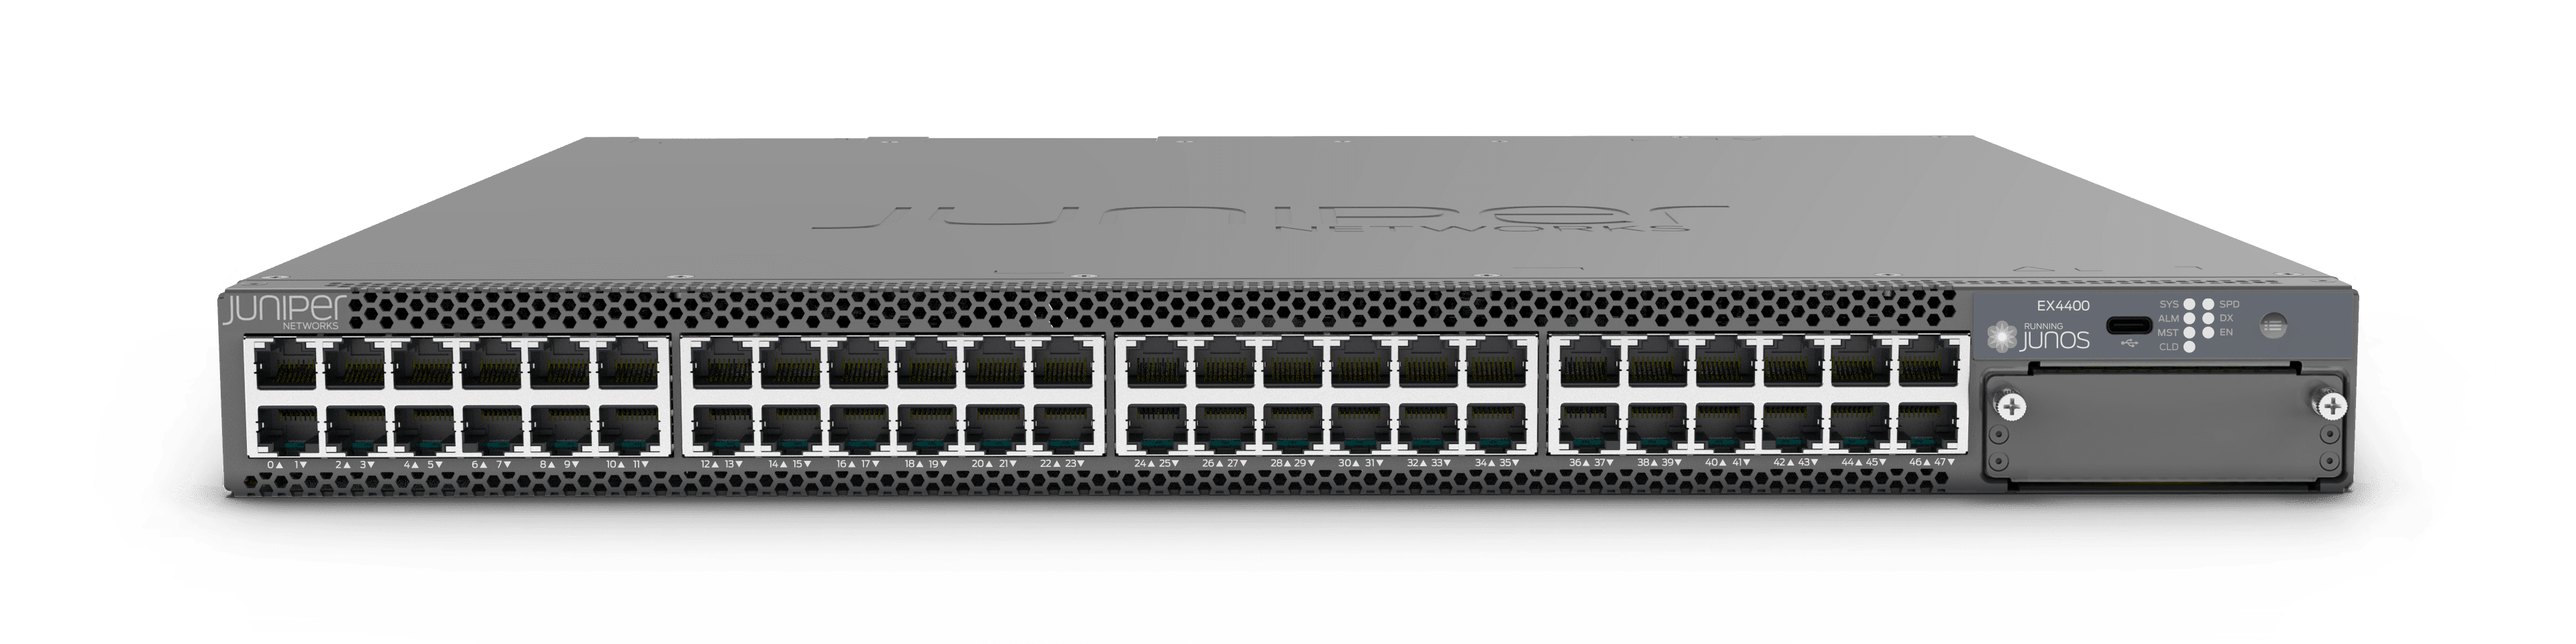 Juniper EX4300 Networks Switch at Rs 45000, Managed Industrial Ethernet  Switch in Noida